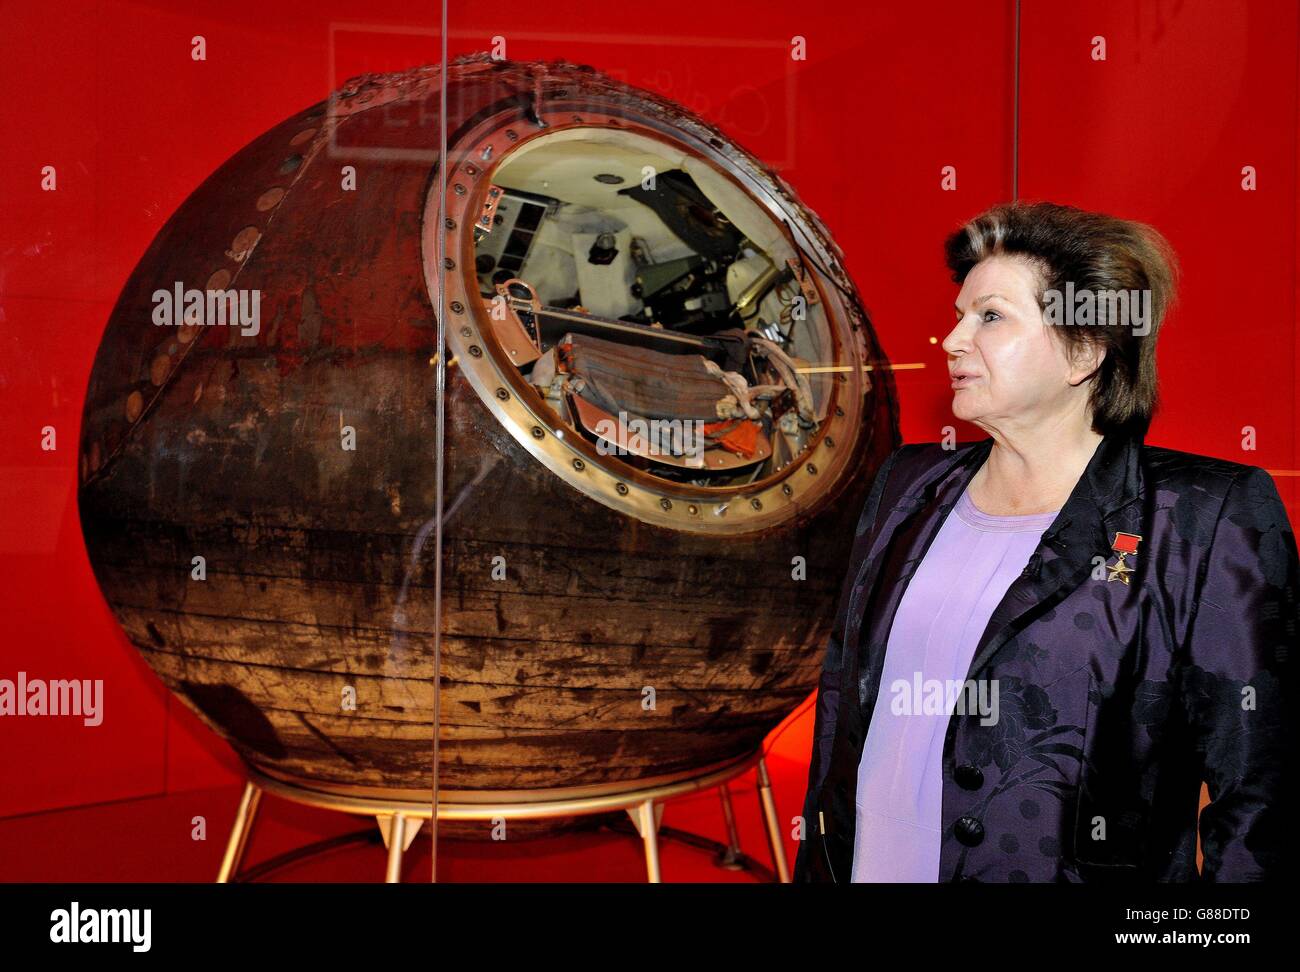 Valentina Tereshkova, the first woman in space, stands in front of Vostok-6, the capsule that she piloted into space, during the press preview of the Science Museum in London's new Cosmonauts: Birth of the Space Age exhibition. Stock Photo